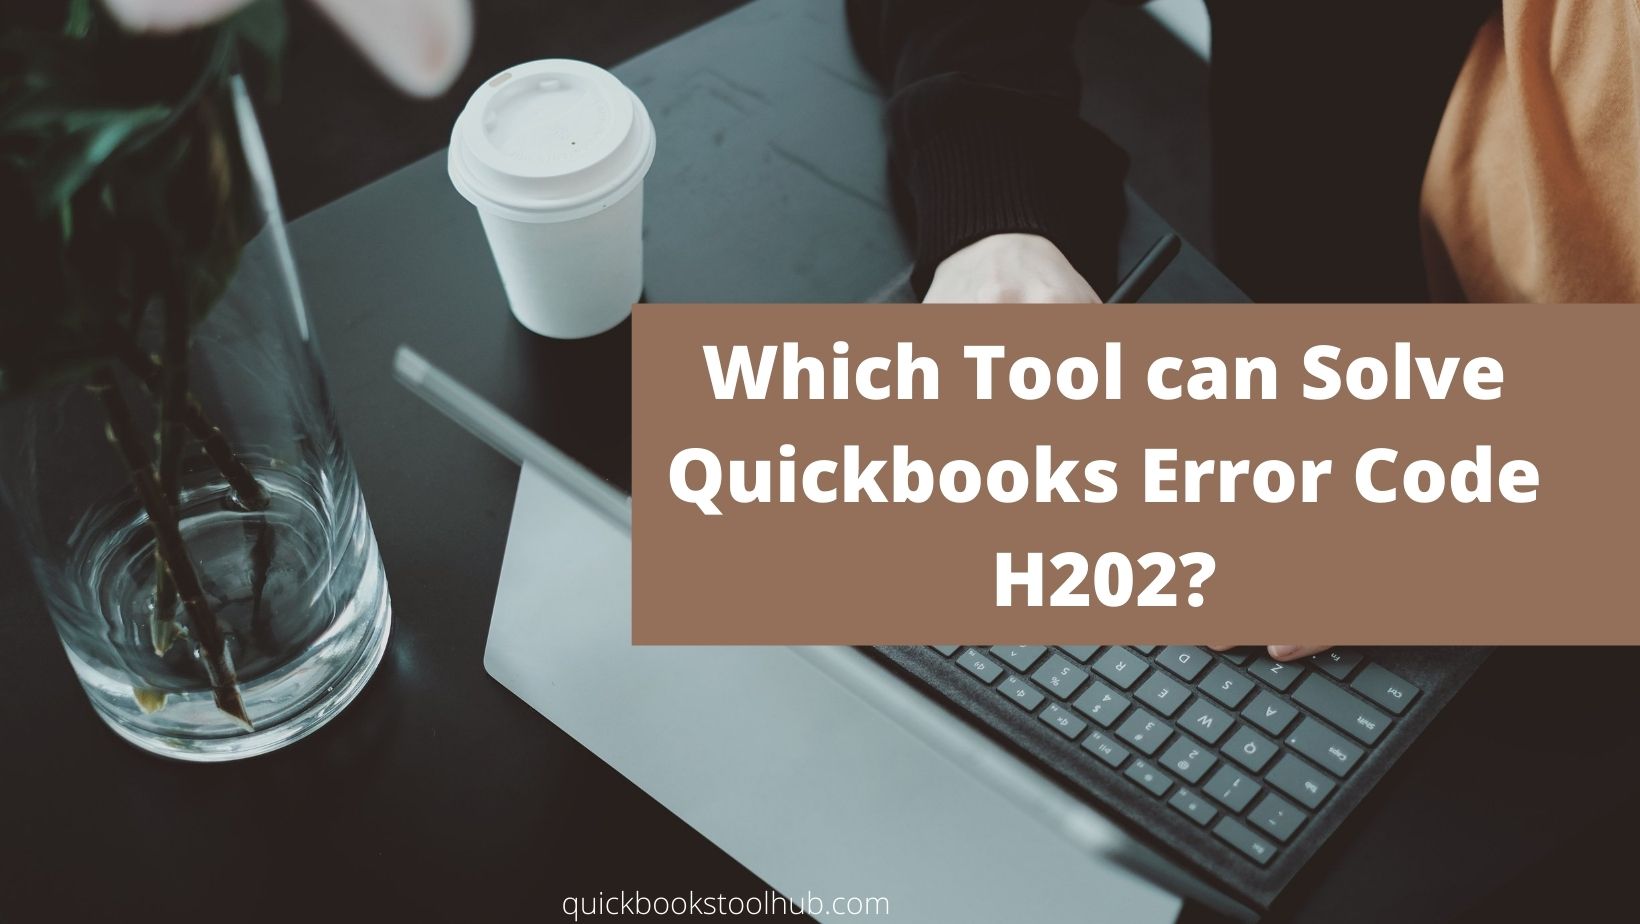 Which Tool can Solve Quickbooks Error Code H202?